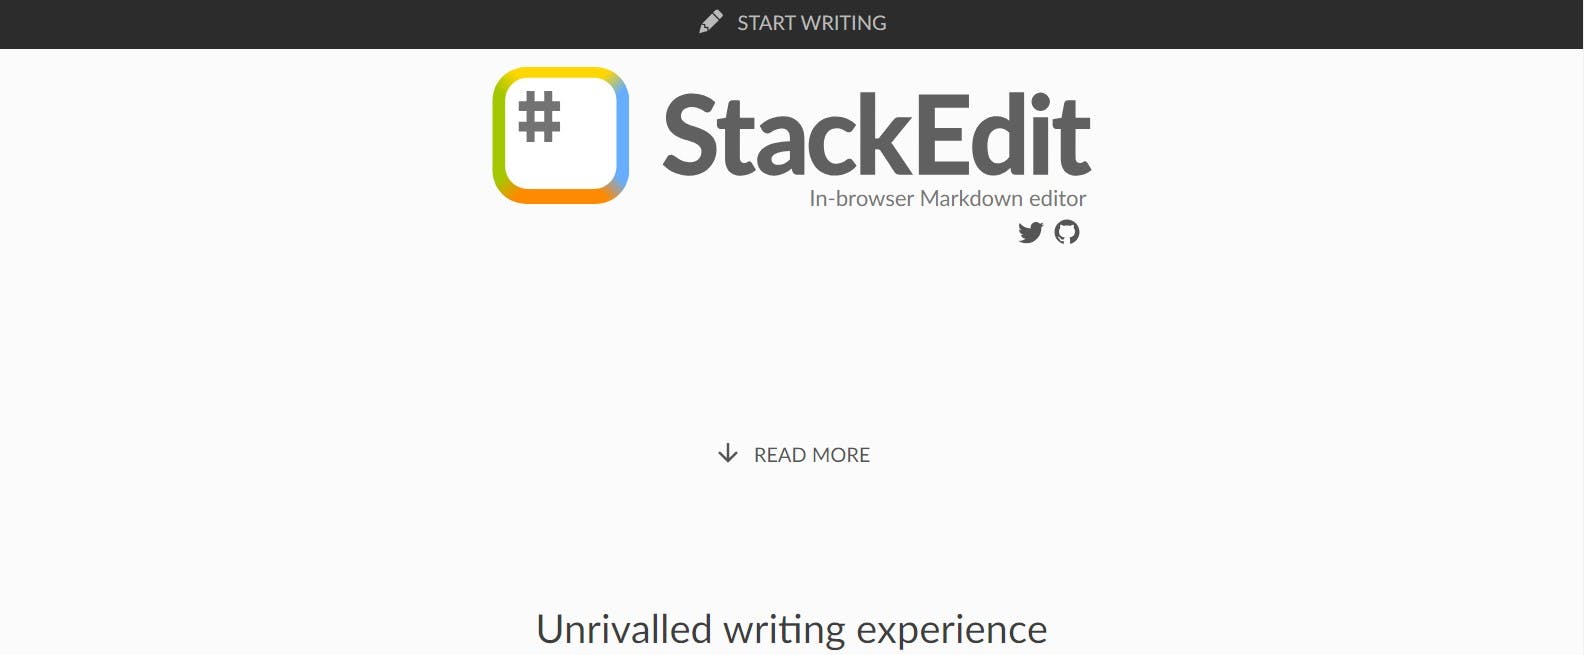 StackEdit - A versatile Markdown editor offering collaborative editing, customizable themes, and seamless cloud integration.